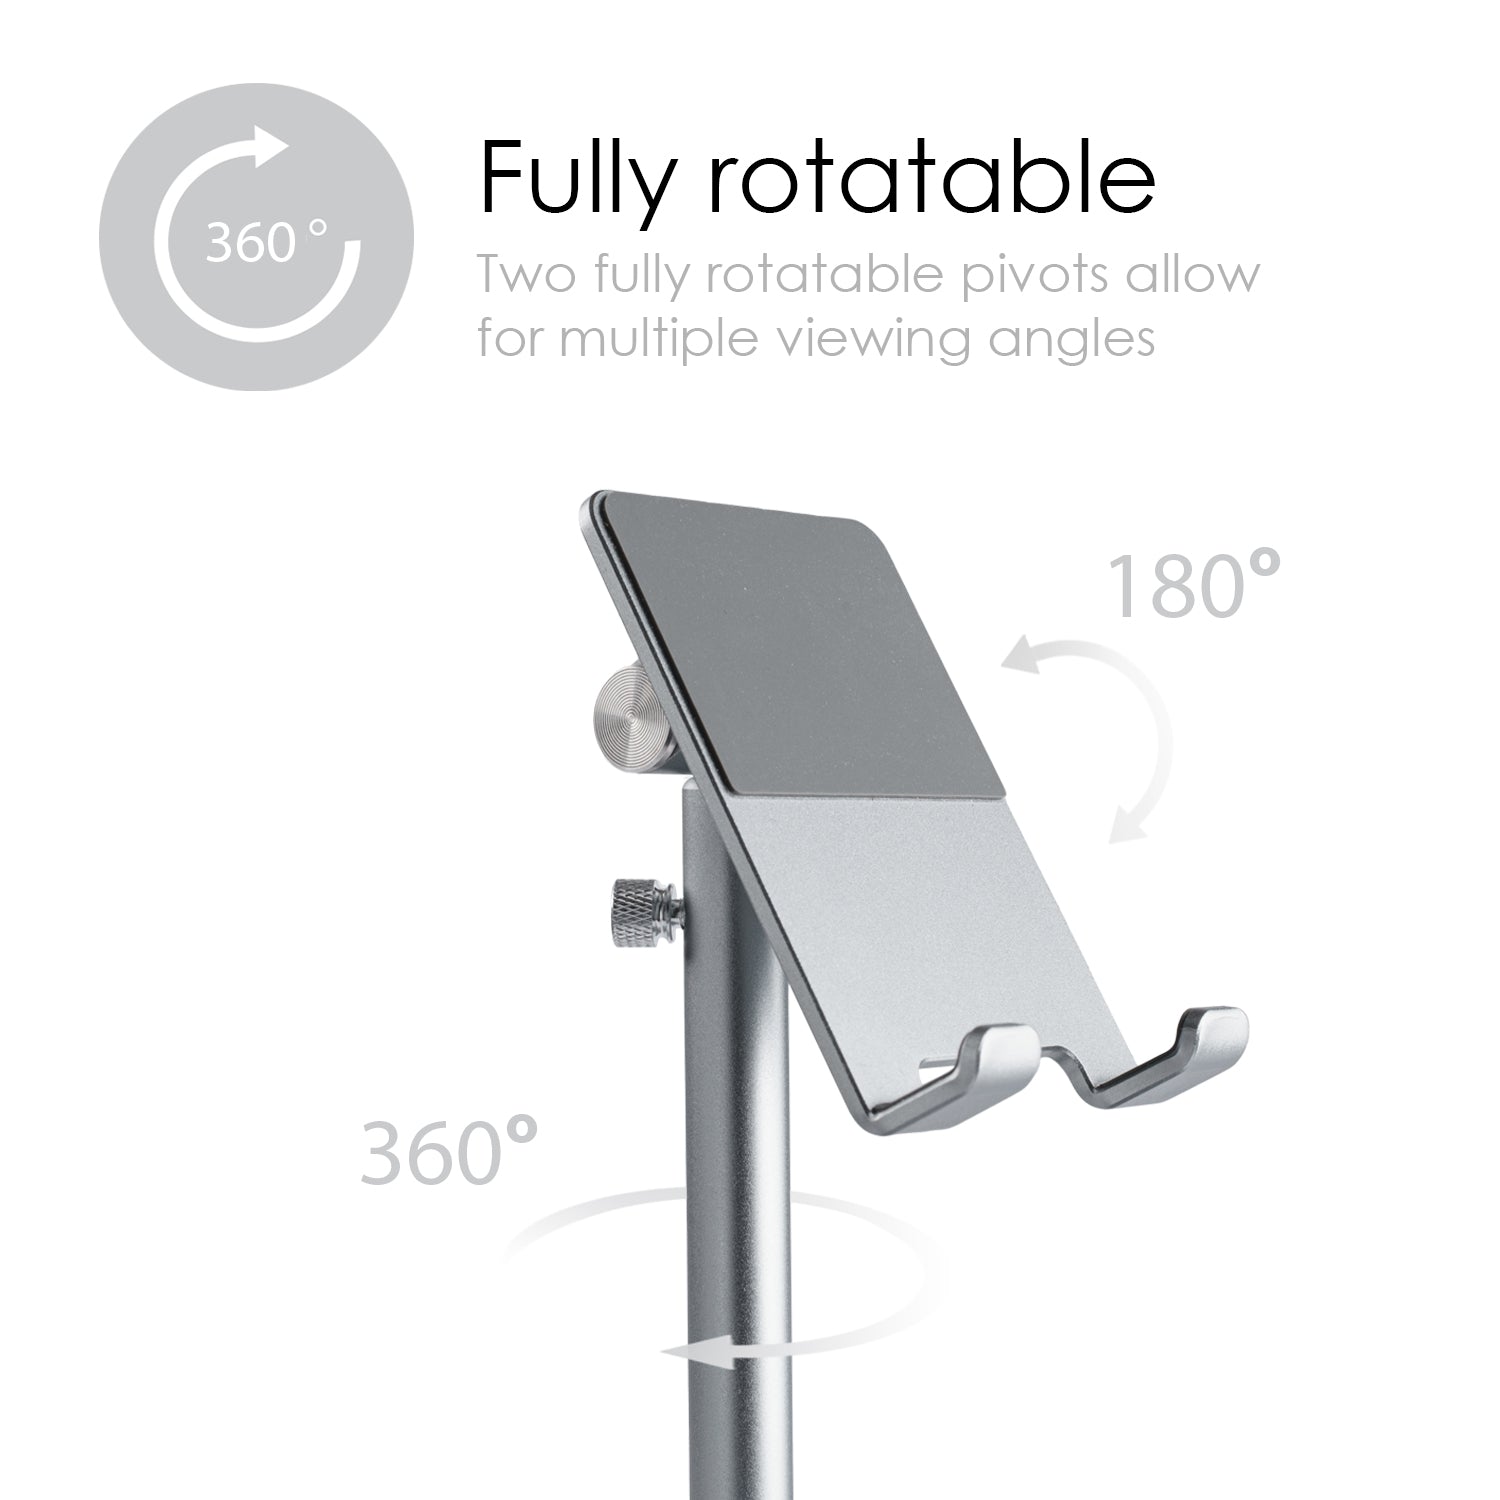 image shows adjustability of an aluminium metal tablet and smartphone  desk  stand .  The device being held can be rotated  360 degrees on the horizontal plane and 180 degrees on the vertical plane.  text reads "fully rotatable - two fully rotatable pivots allow for multiple viewing angles" 